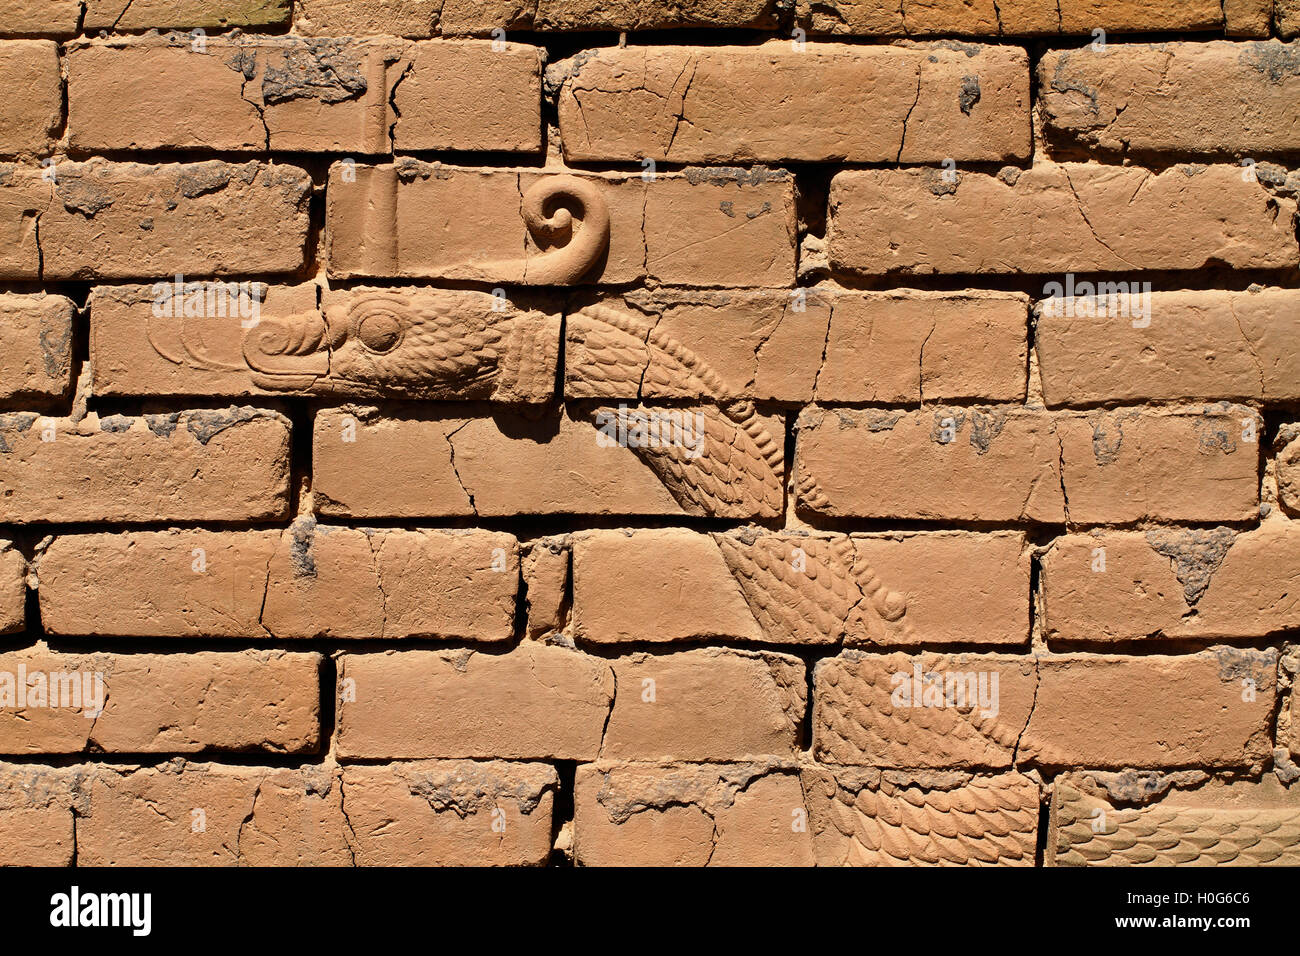 Mushussu, the dragon of Marduk, depicted as bas-relief on the original Ishtar gate, ancient Babylon, Iraq. Stock Photo